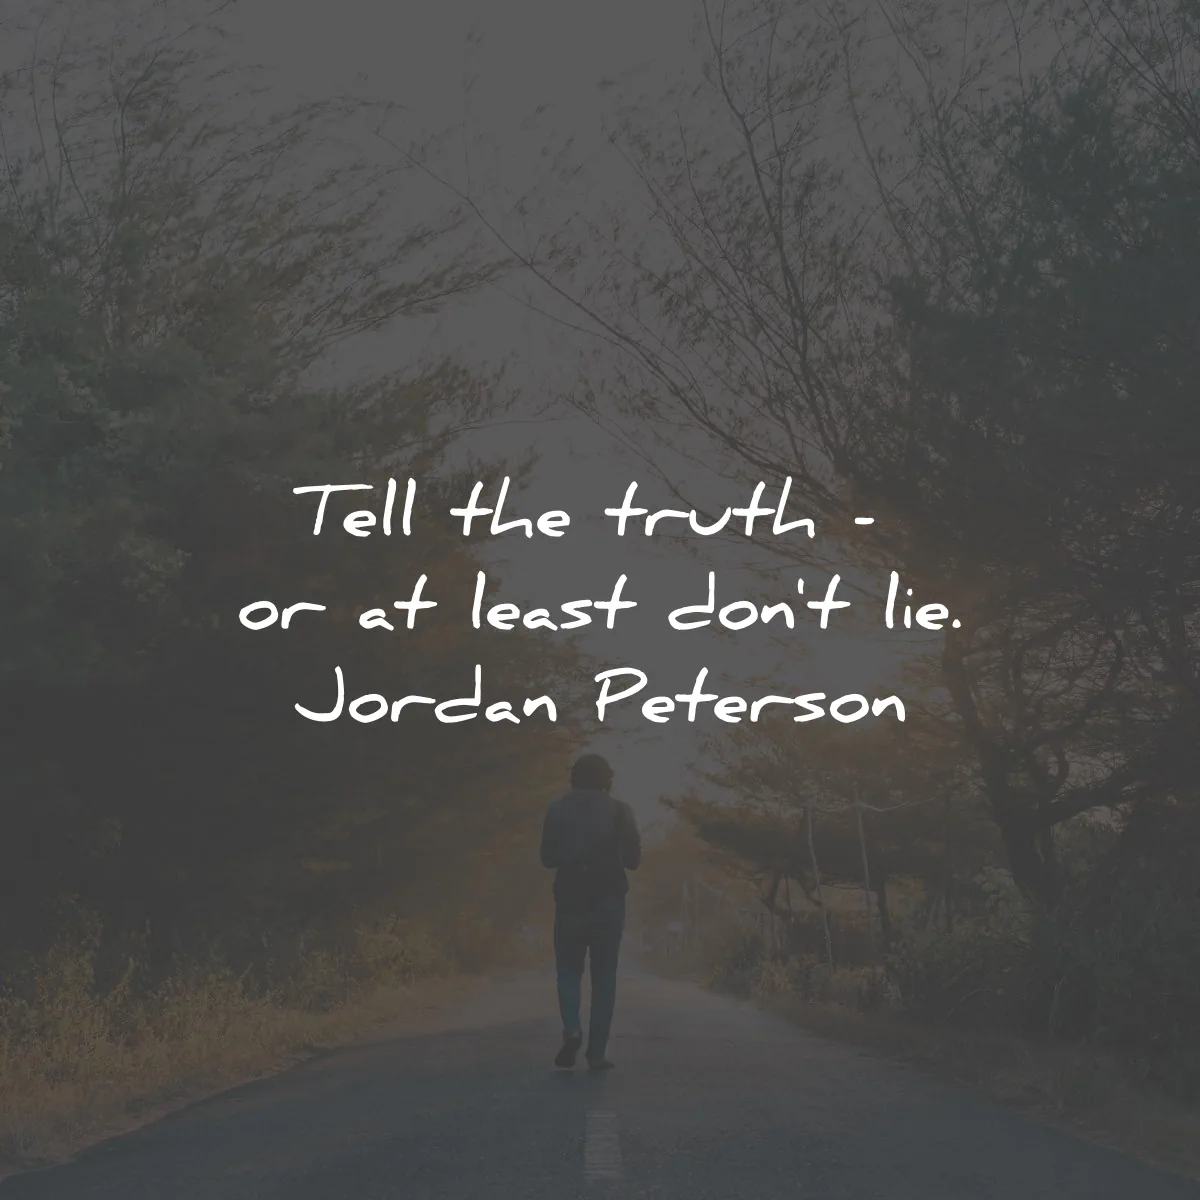 12 rules for live quotes jordan peterson tell truth least dont lie wisdom